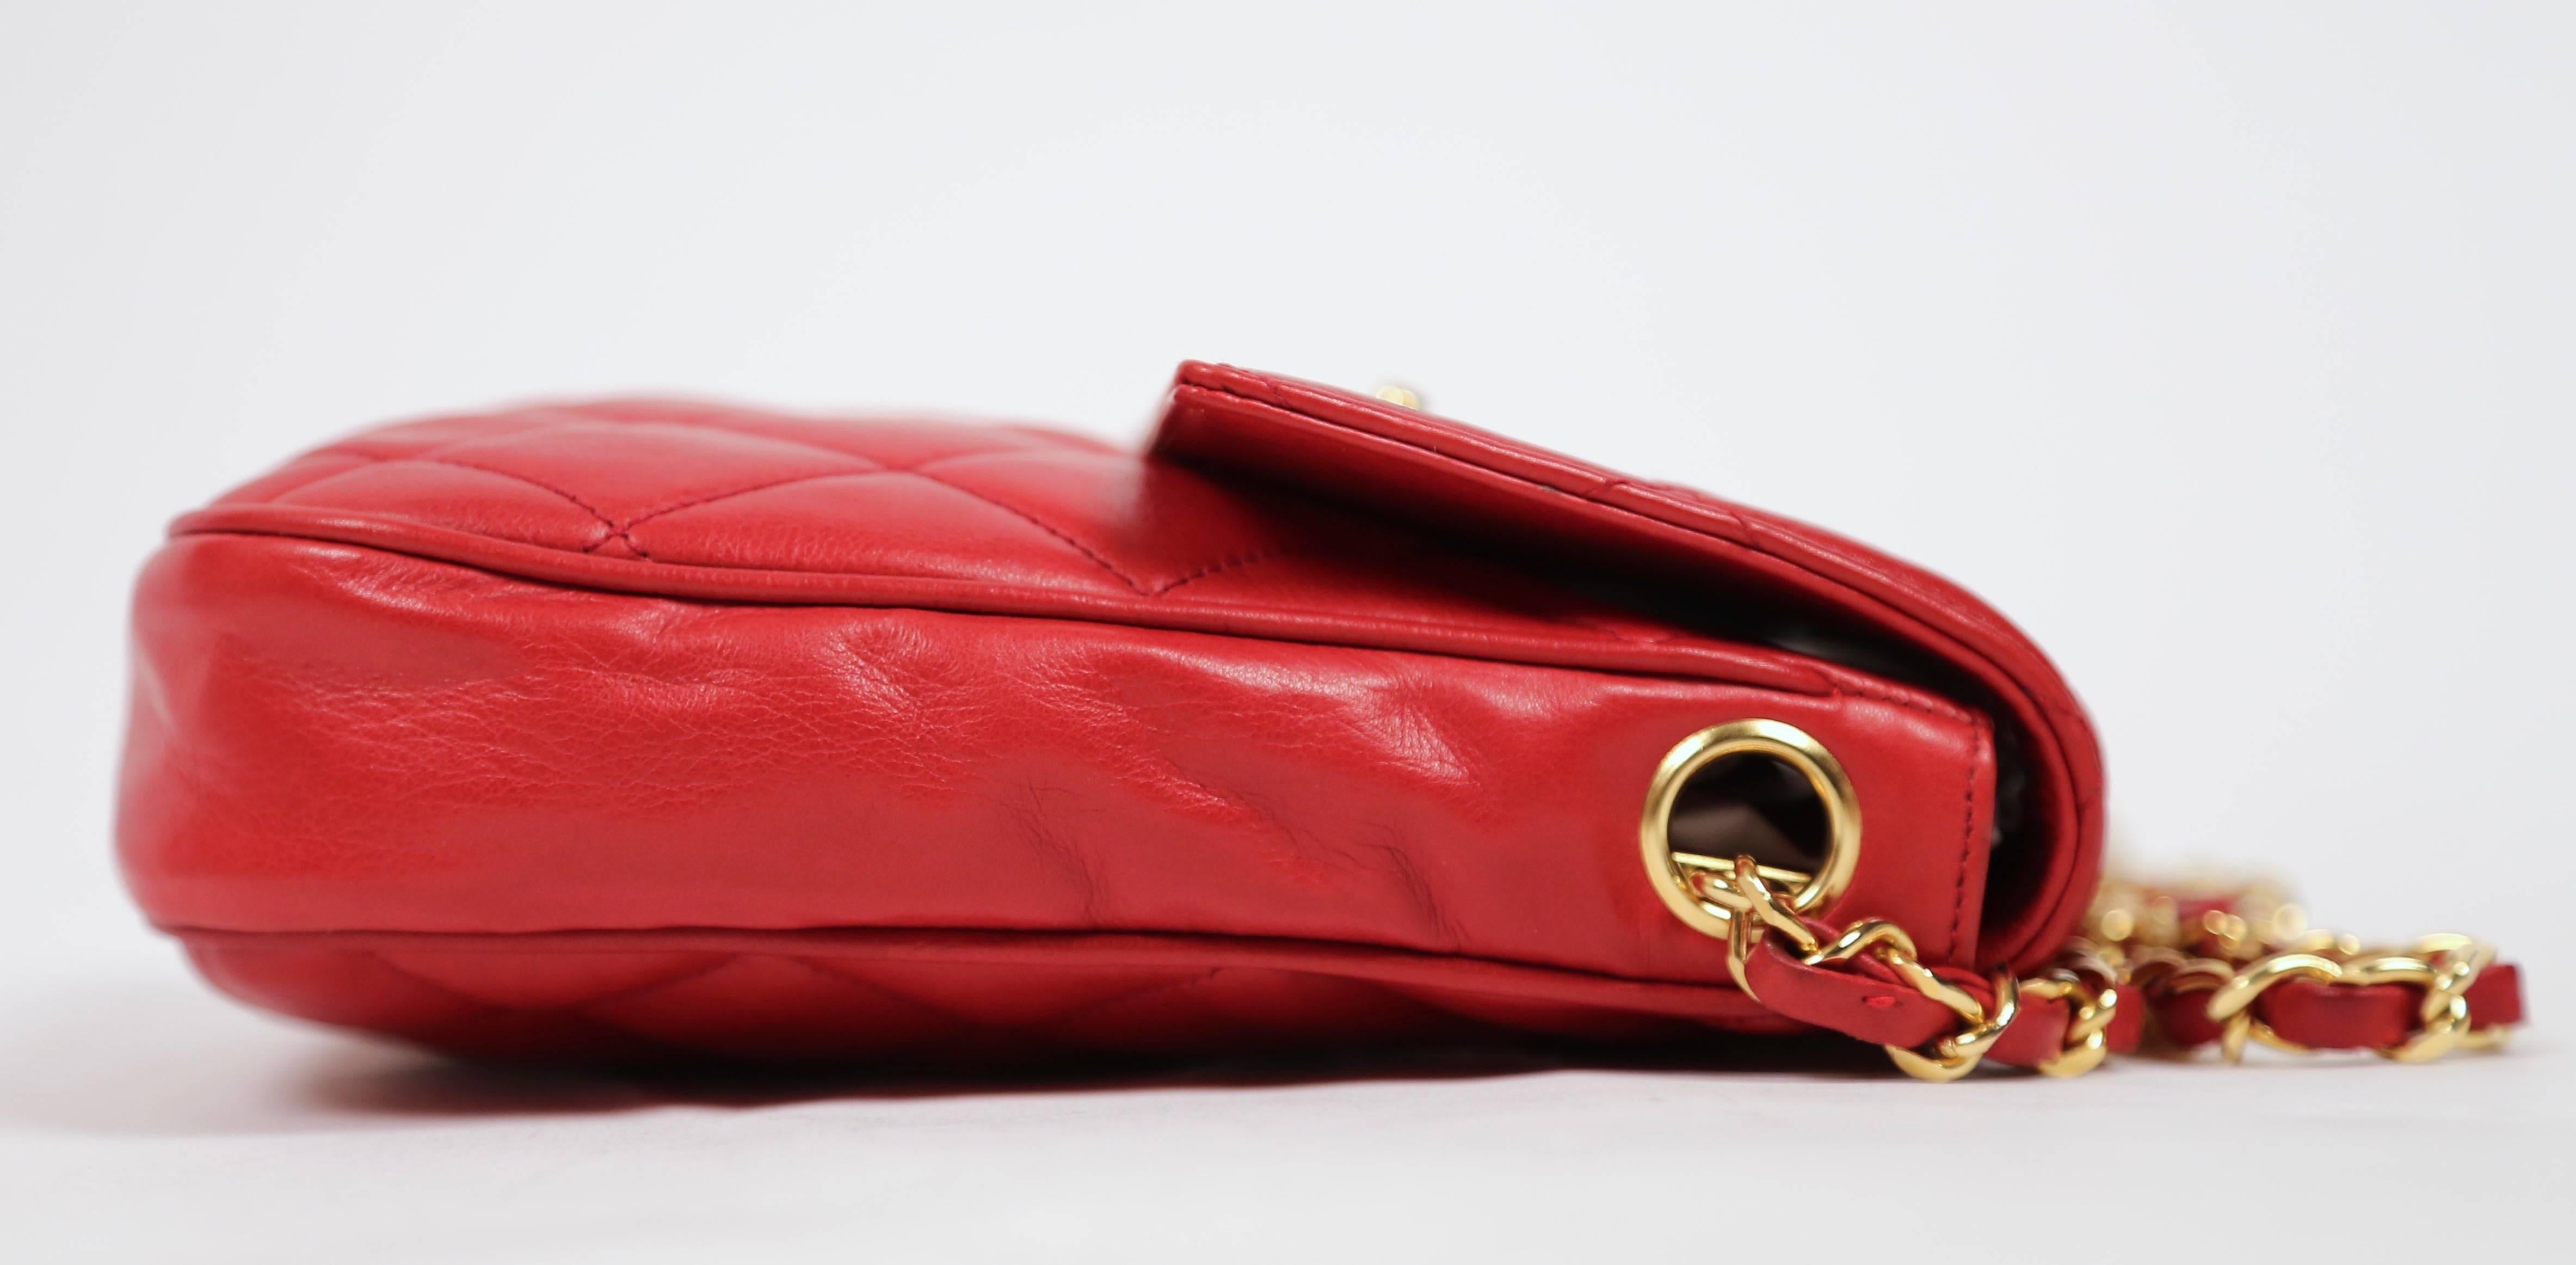 Vivid red butter soft leather satchel style bag by Chanel circa 1986-88. Approximate measurements: 7" x 7" x 1.75". Shoulder strap which can be worn crossbody on a petite frame. Strap has a drop 17" (34" total length). Very